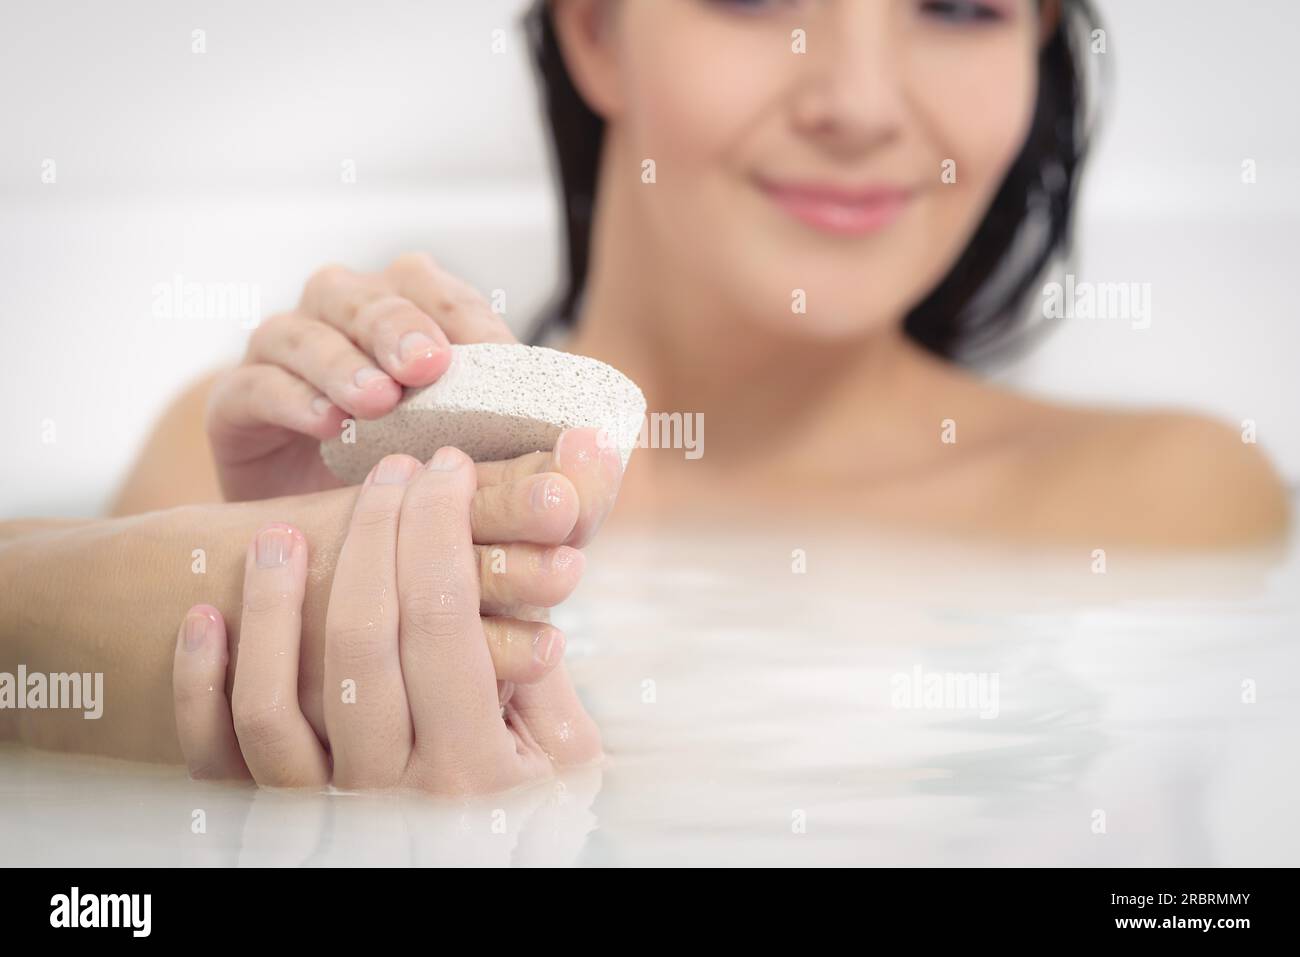 Woman relaxing in a hot soapy bath using a pumice stone to exfoliate her feet and remove dead skin cells from the sole in a personal hygiene and Stock Photo